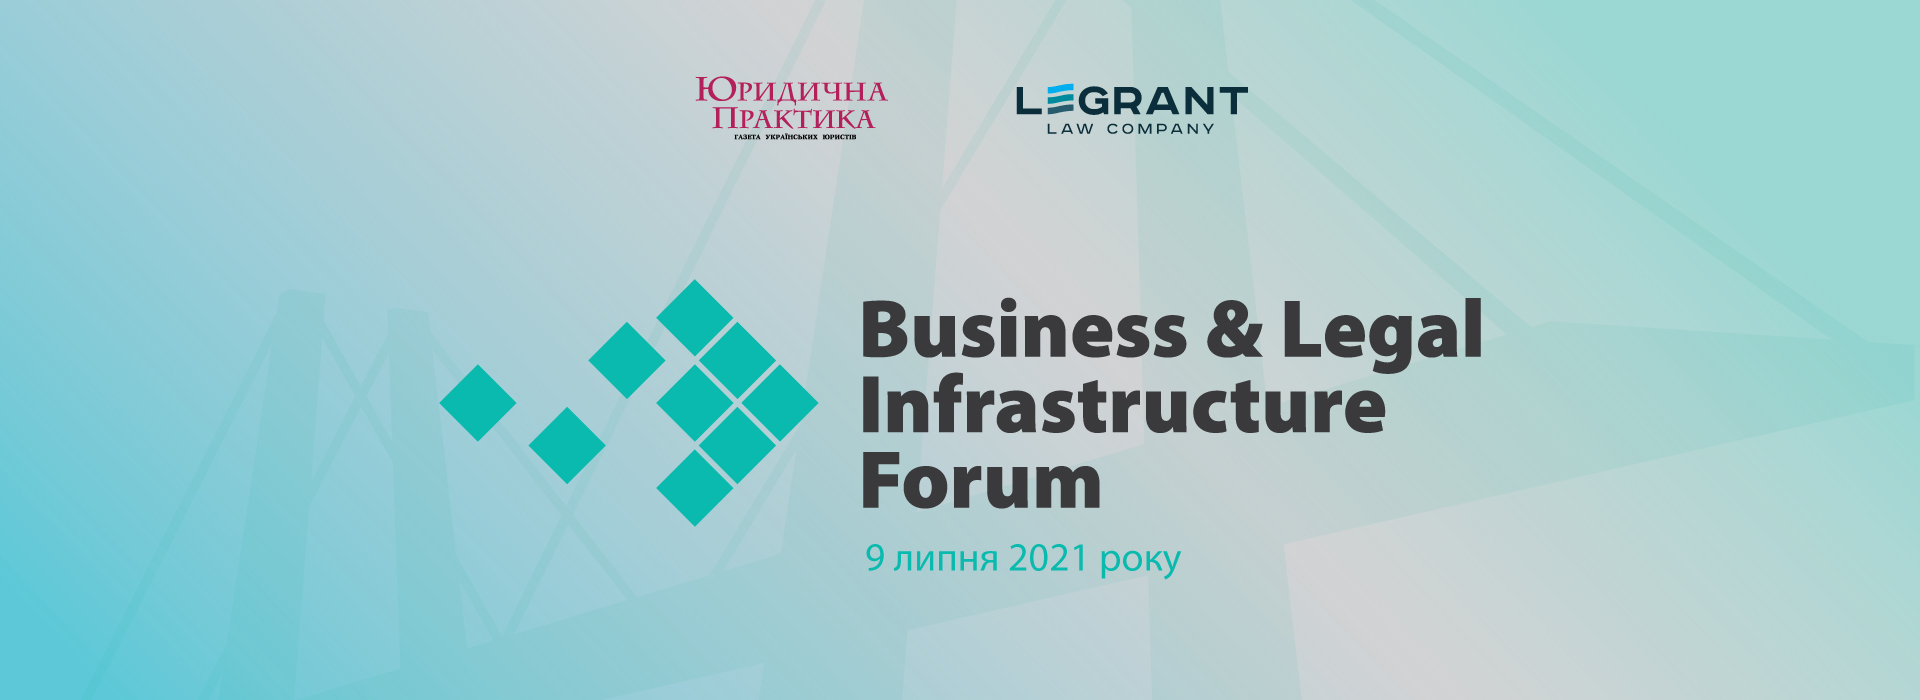 I Business & Legal Infrastructure Forum